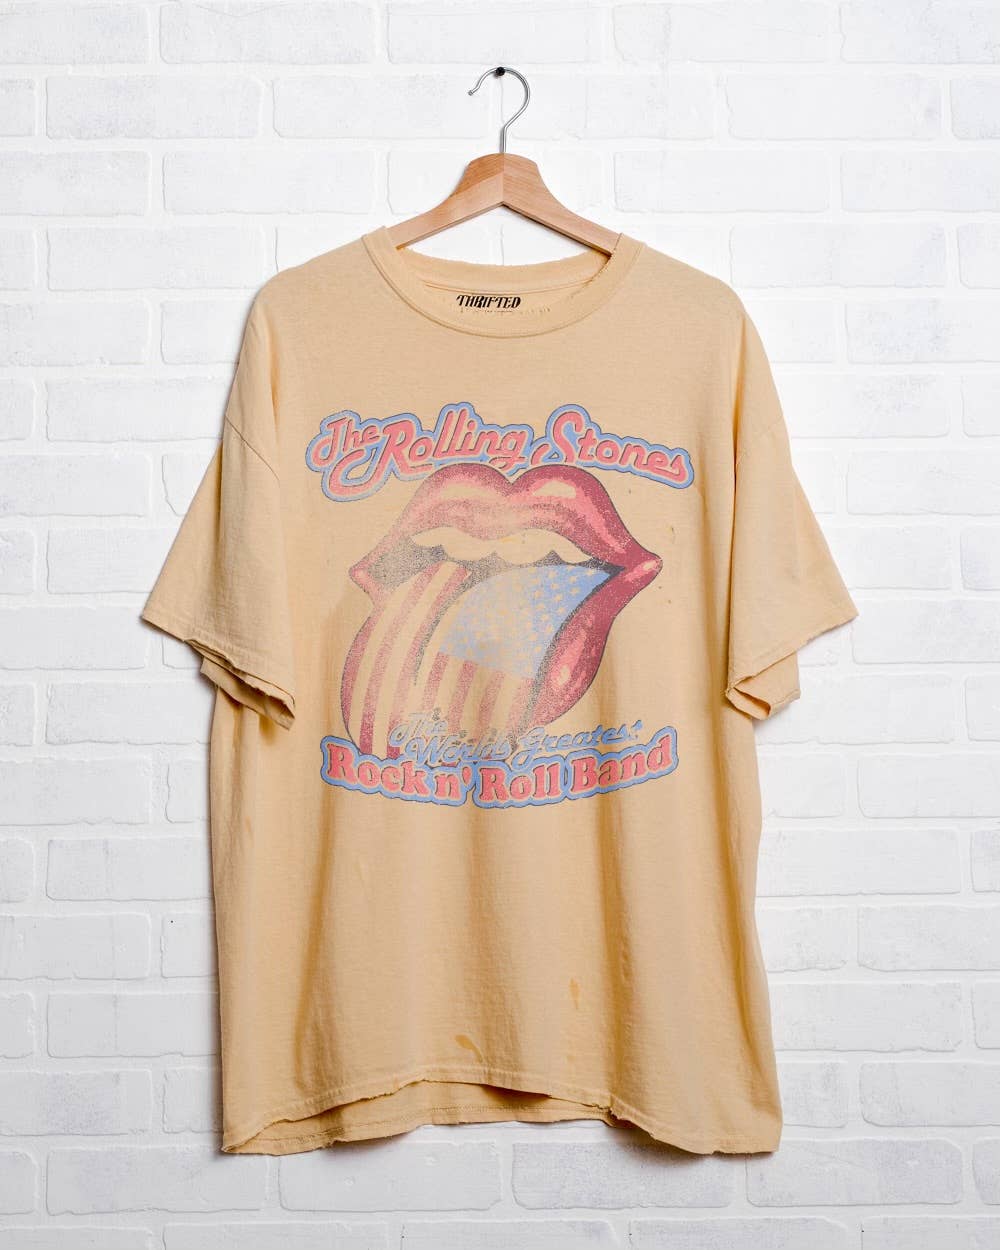 Rollings Stones World's Greatest Band Yellow Thrifted Tee: 2XL - Kantha Bae